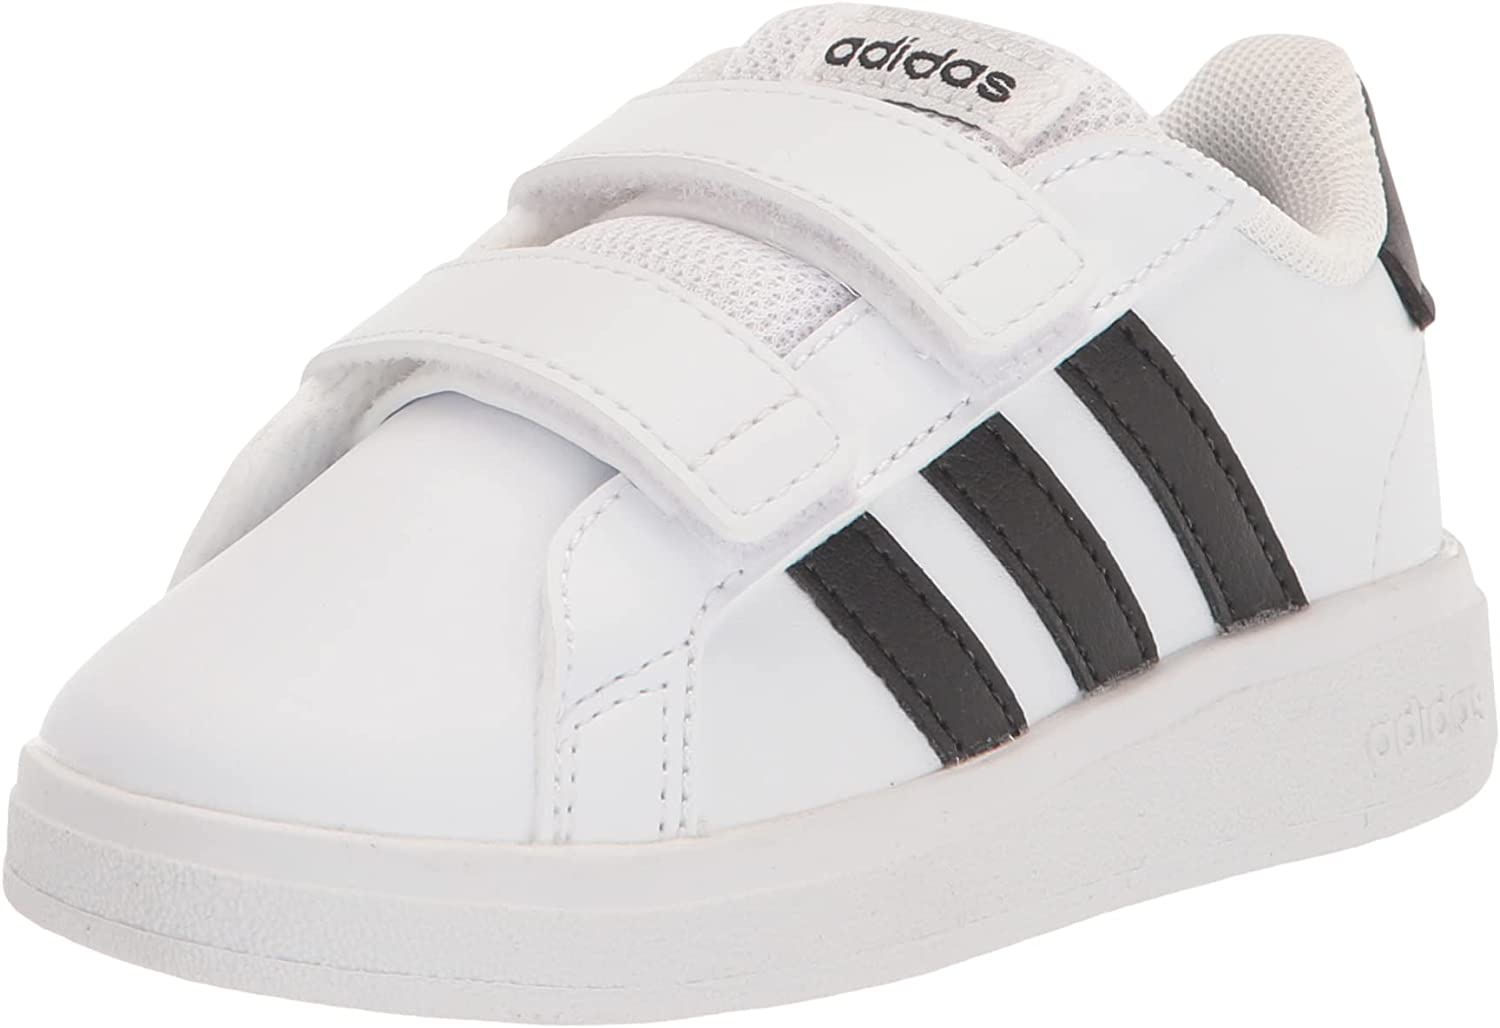 adidas Grand Court Lifestyle Hook and Loop Shoes Kids'